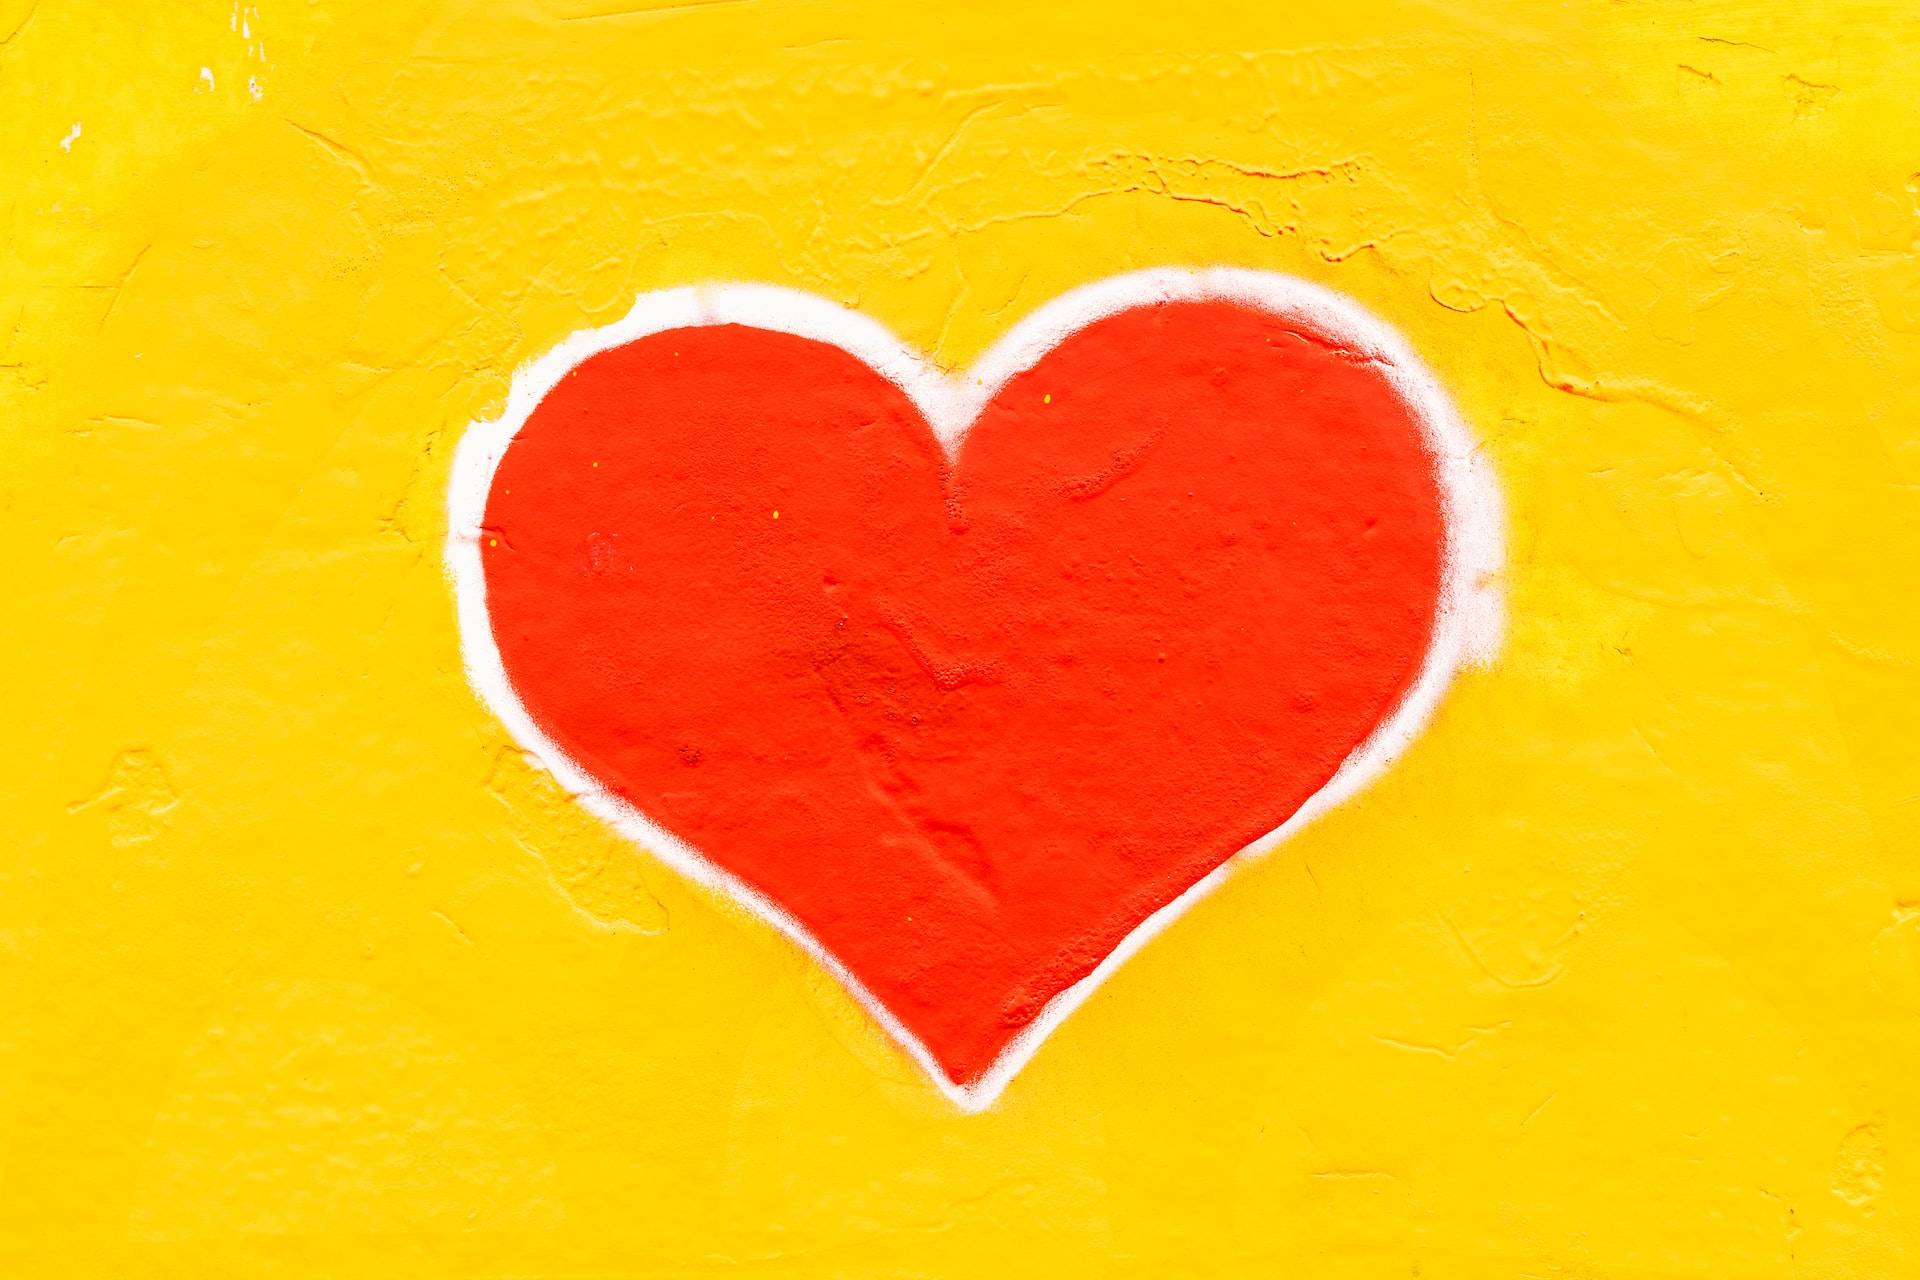 A love heart painted on a wall.